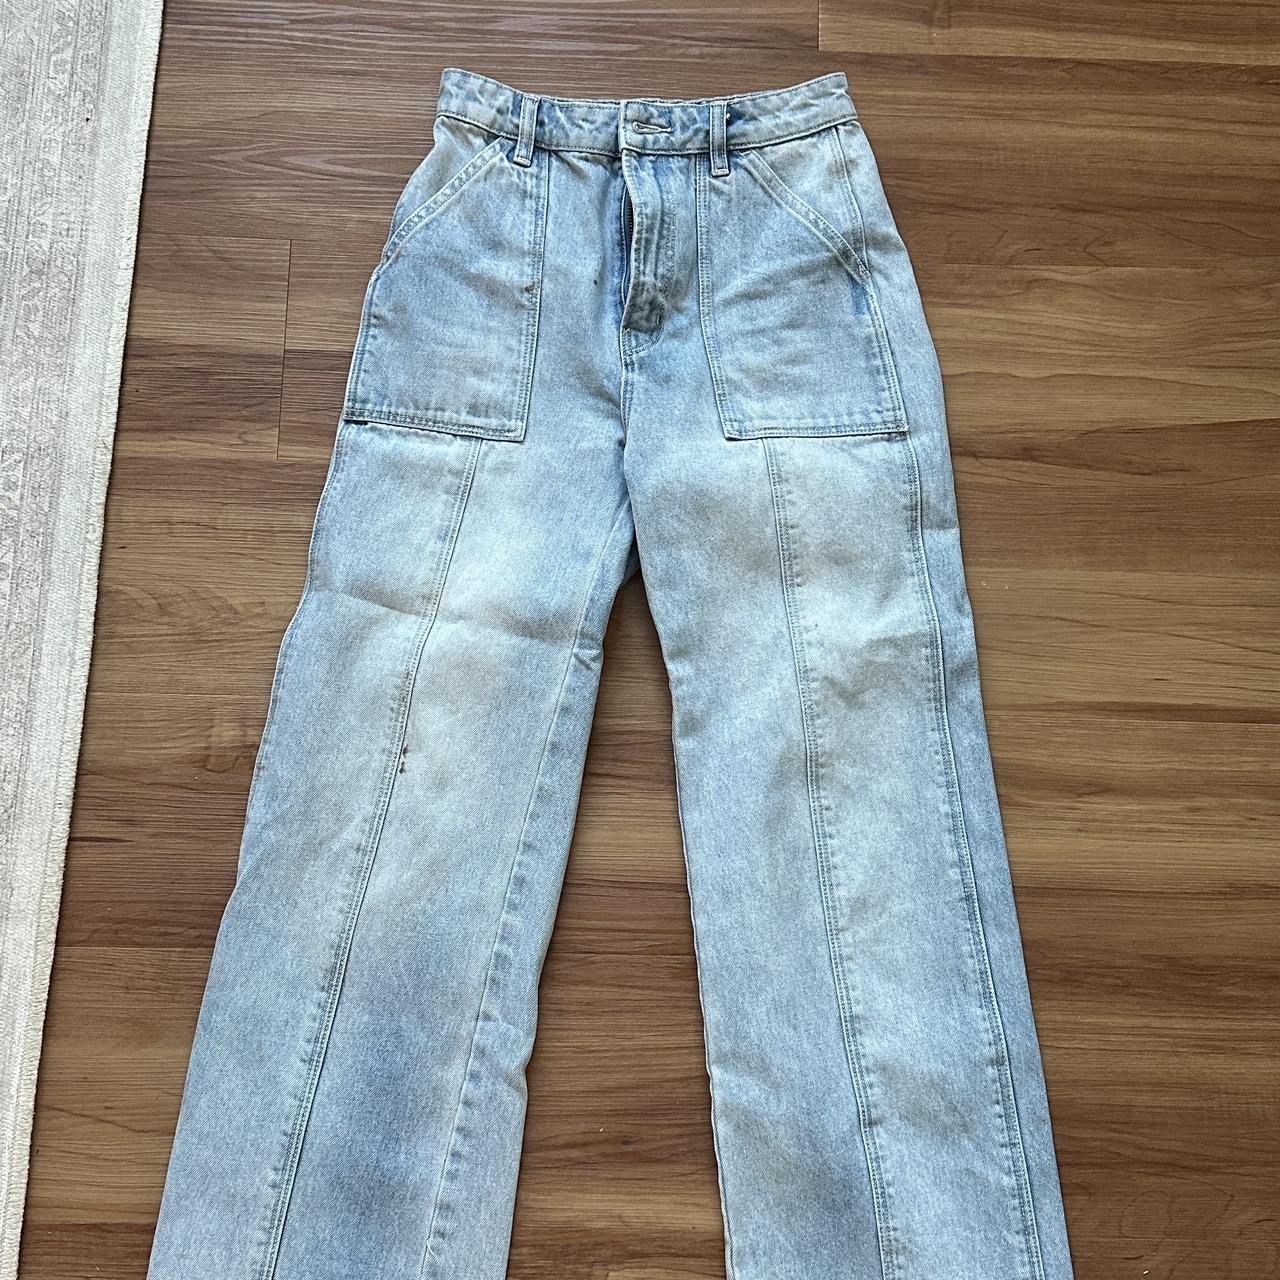 iNTEREST CHECK Beautiful 🌸 Rolla's Sailor jeans in - Depop